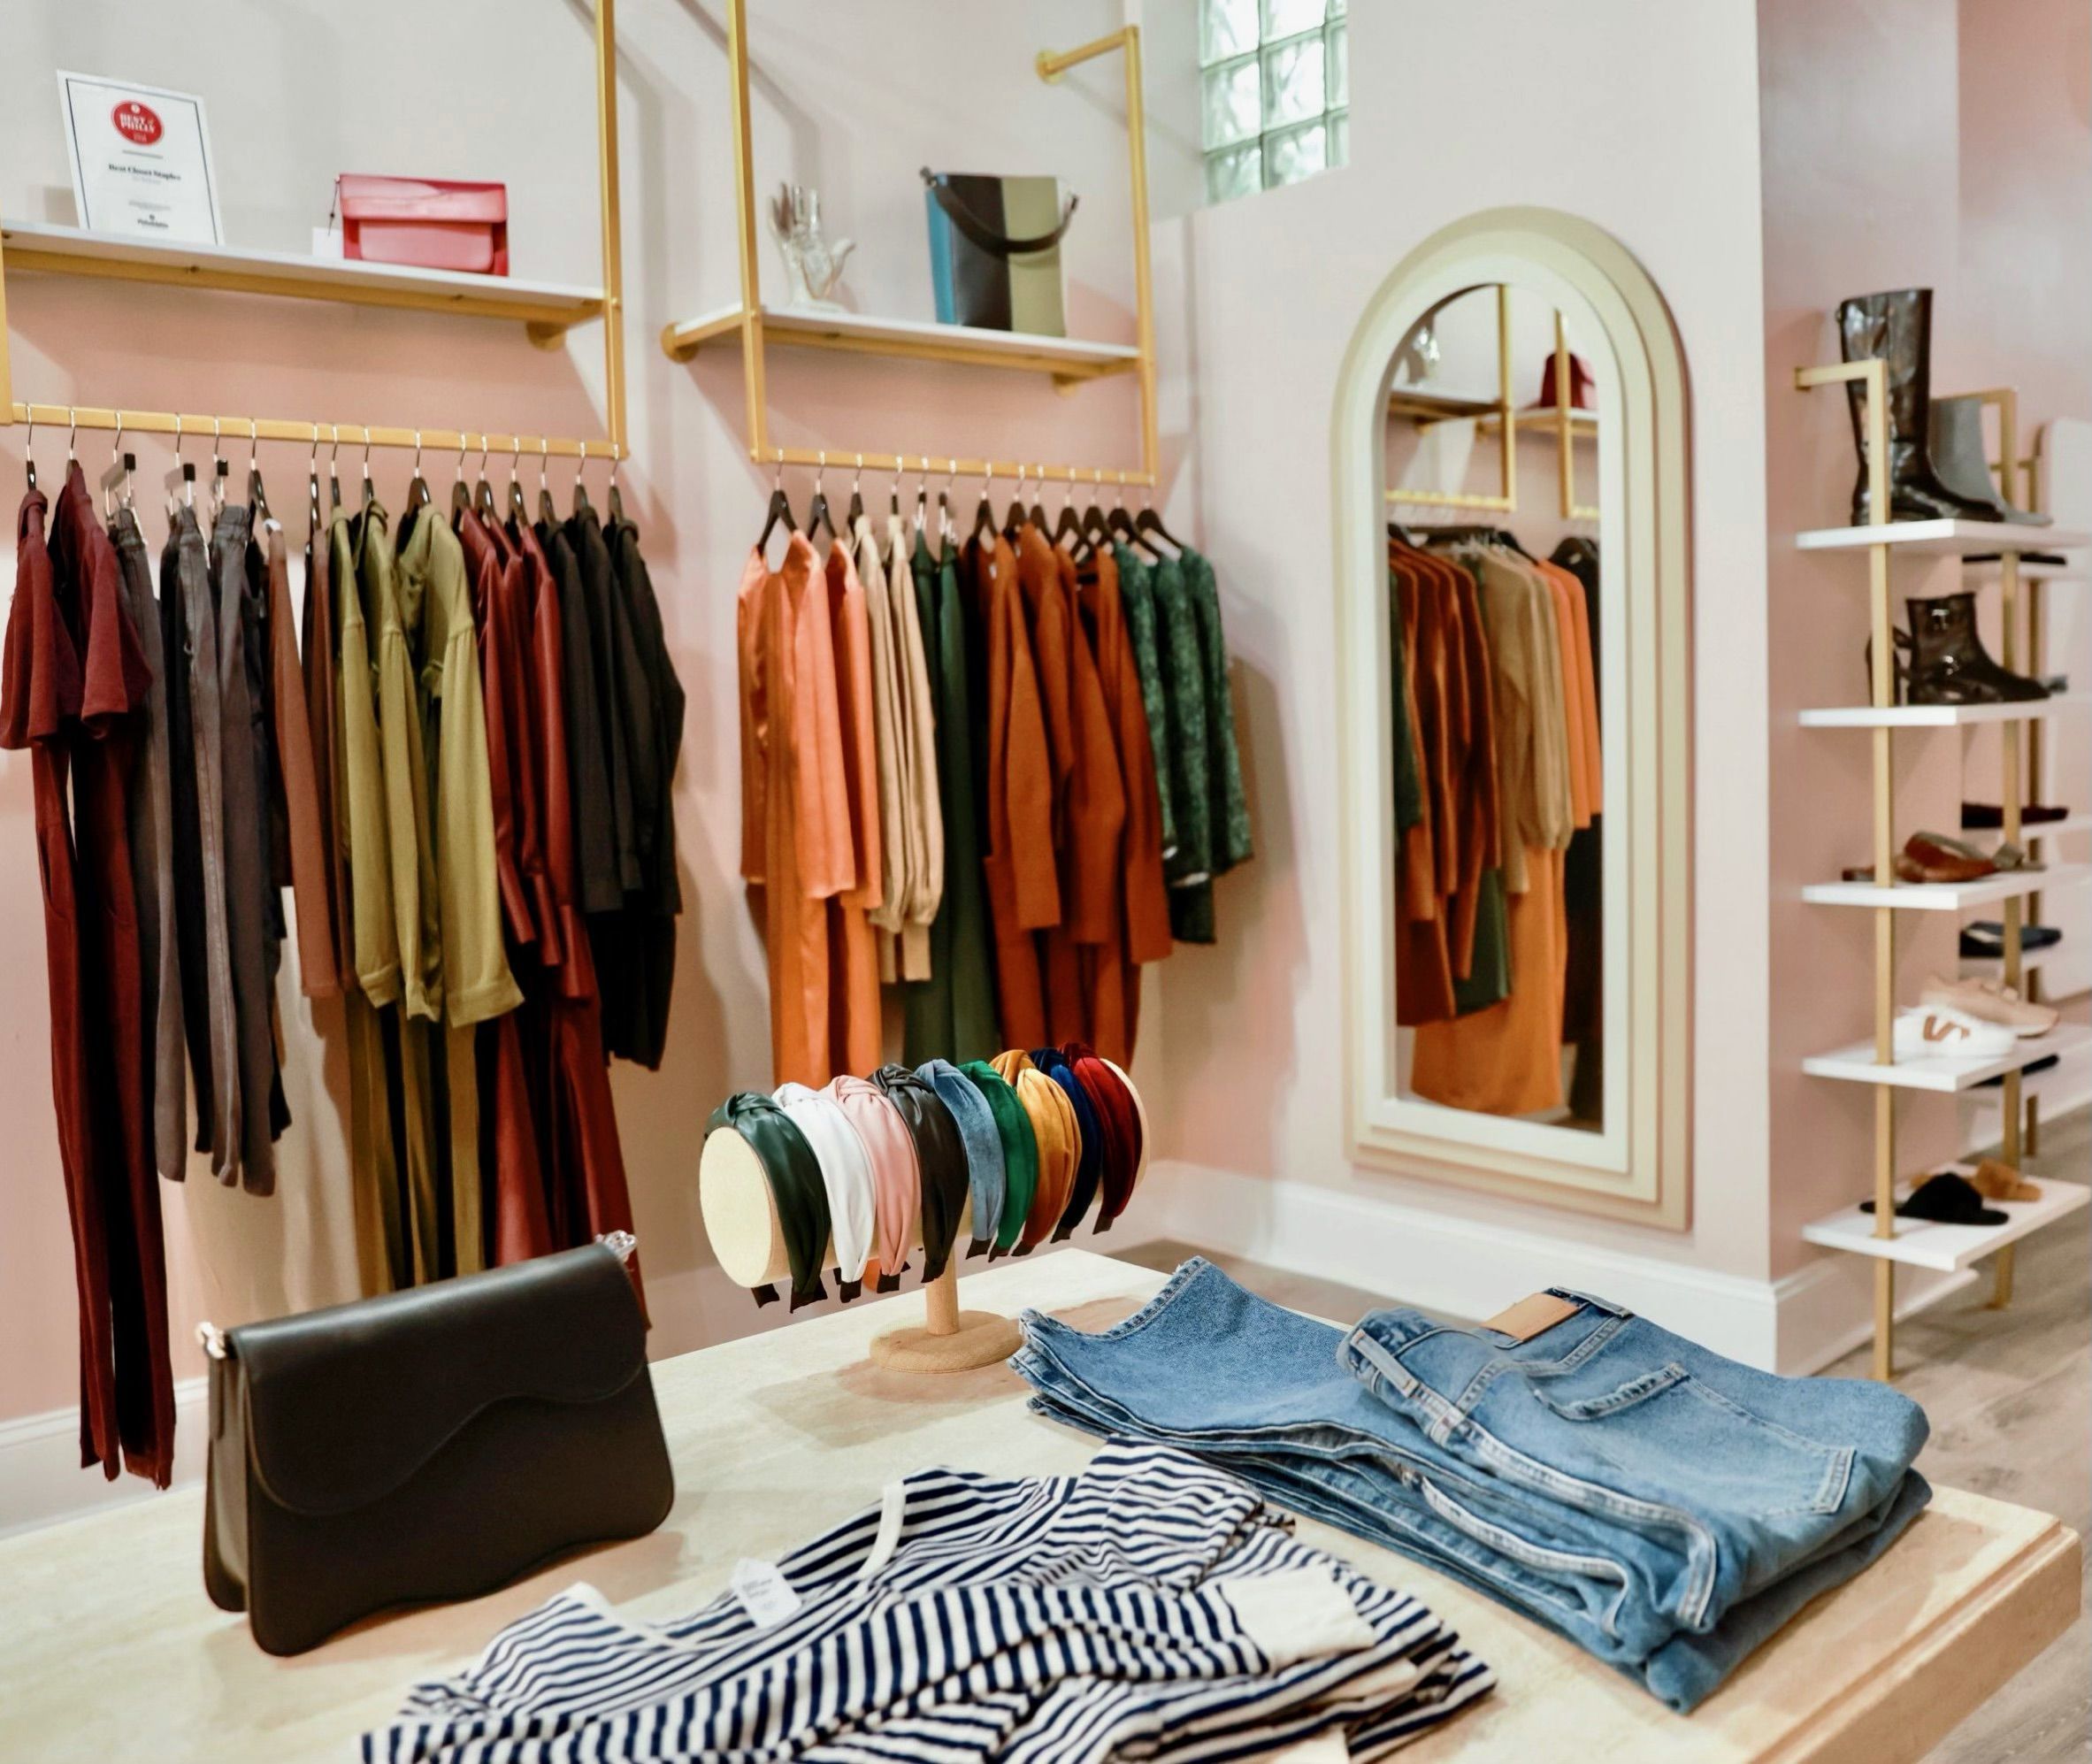 8 must-visit women's specialty stores for spring fashion in